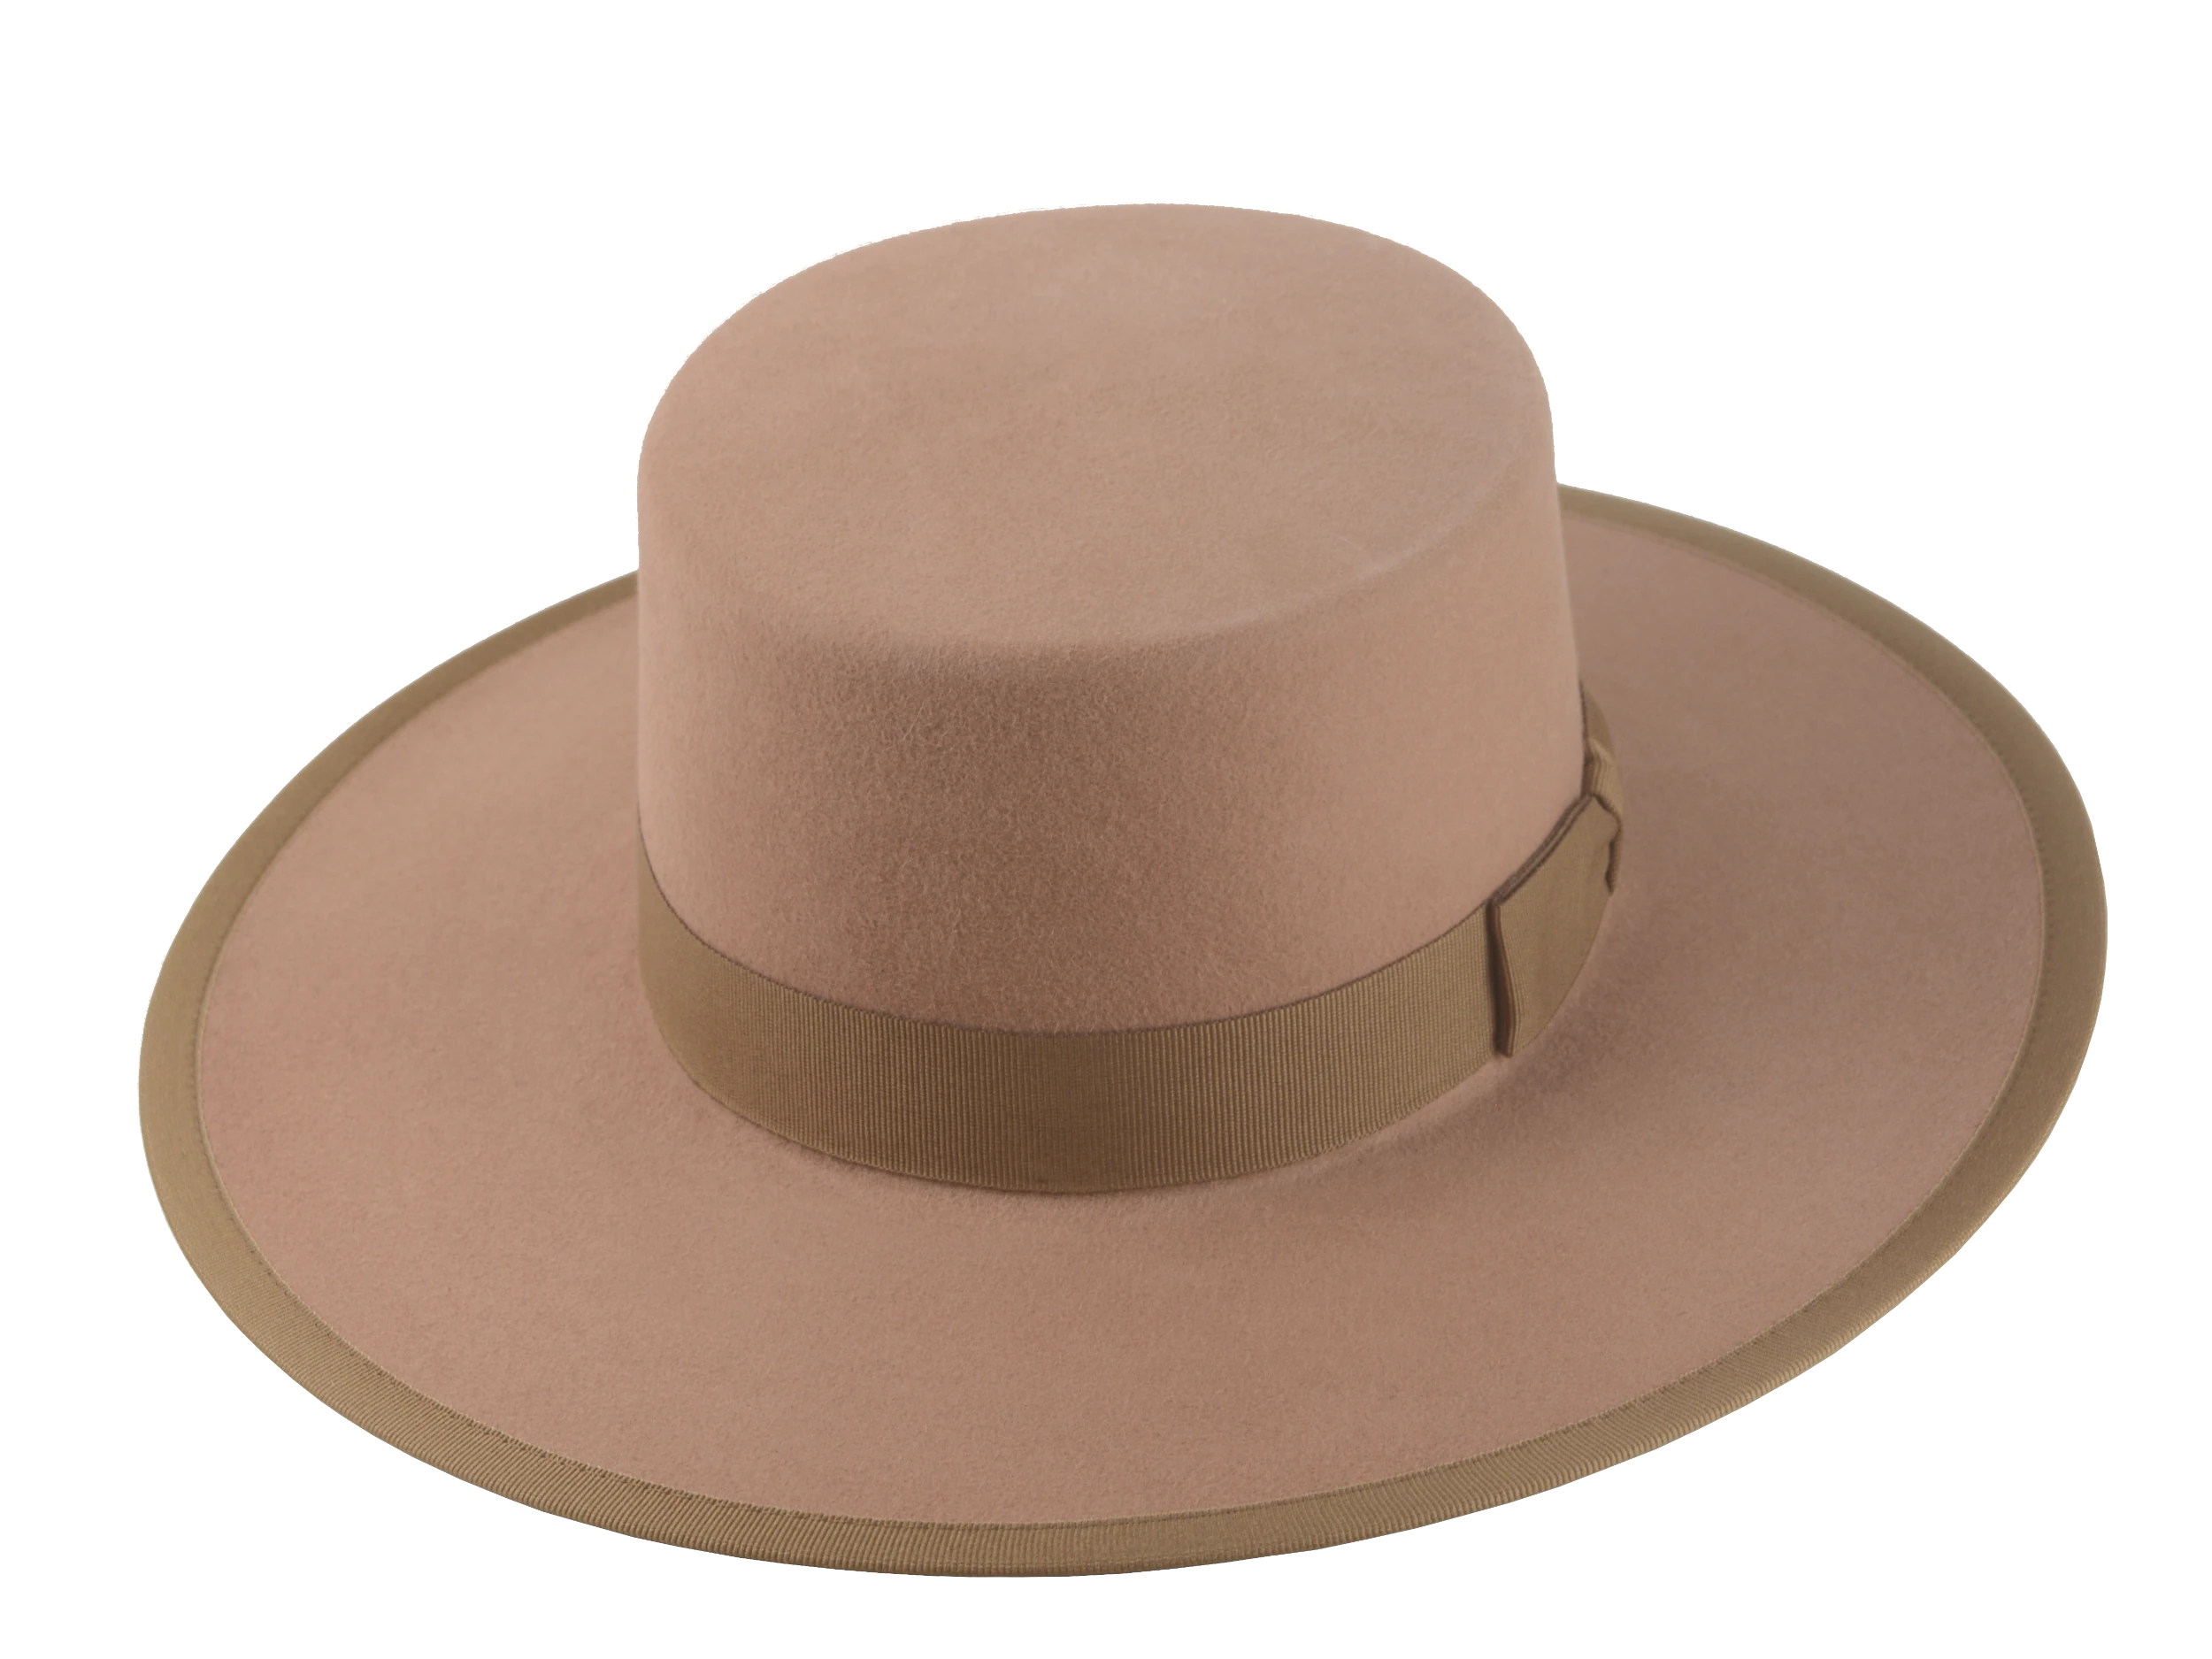 The Gaucho: Top-down view highlighting the hat's symmetrical design and craftsmanship | Agnoulita Hats